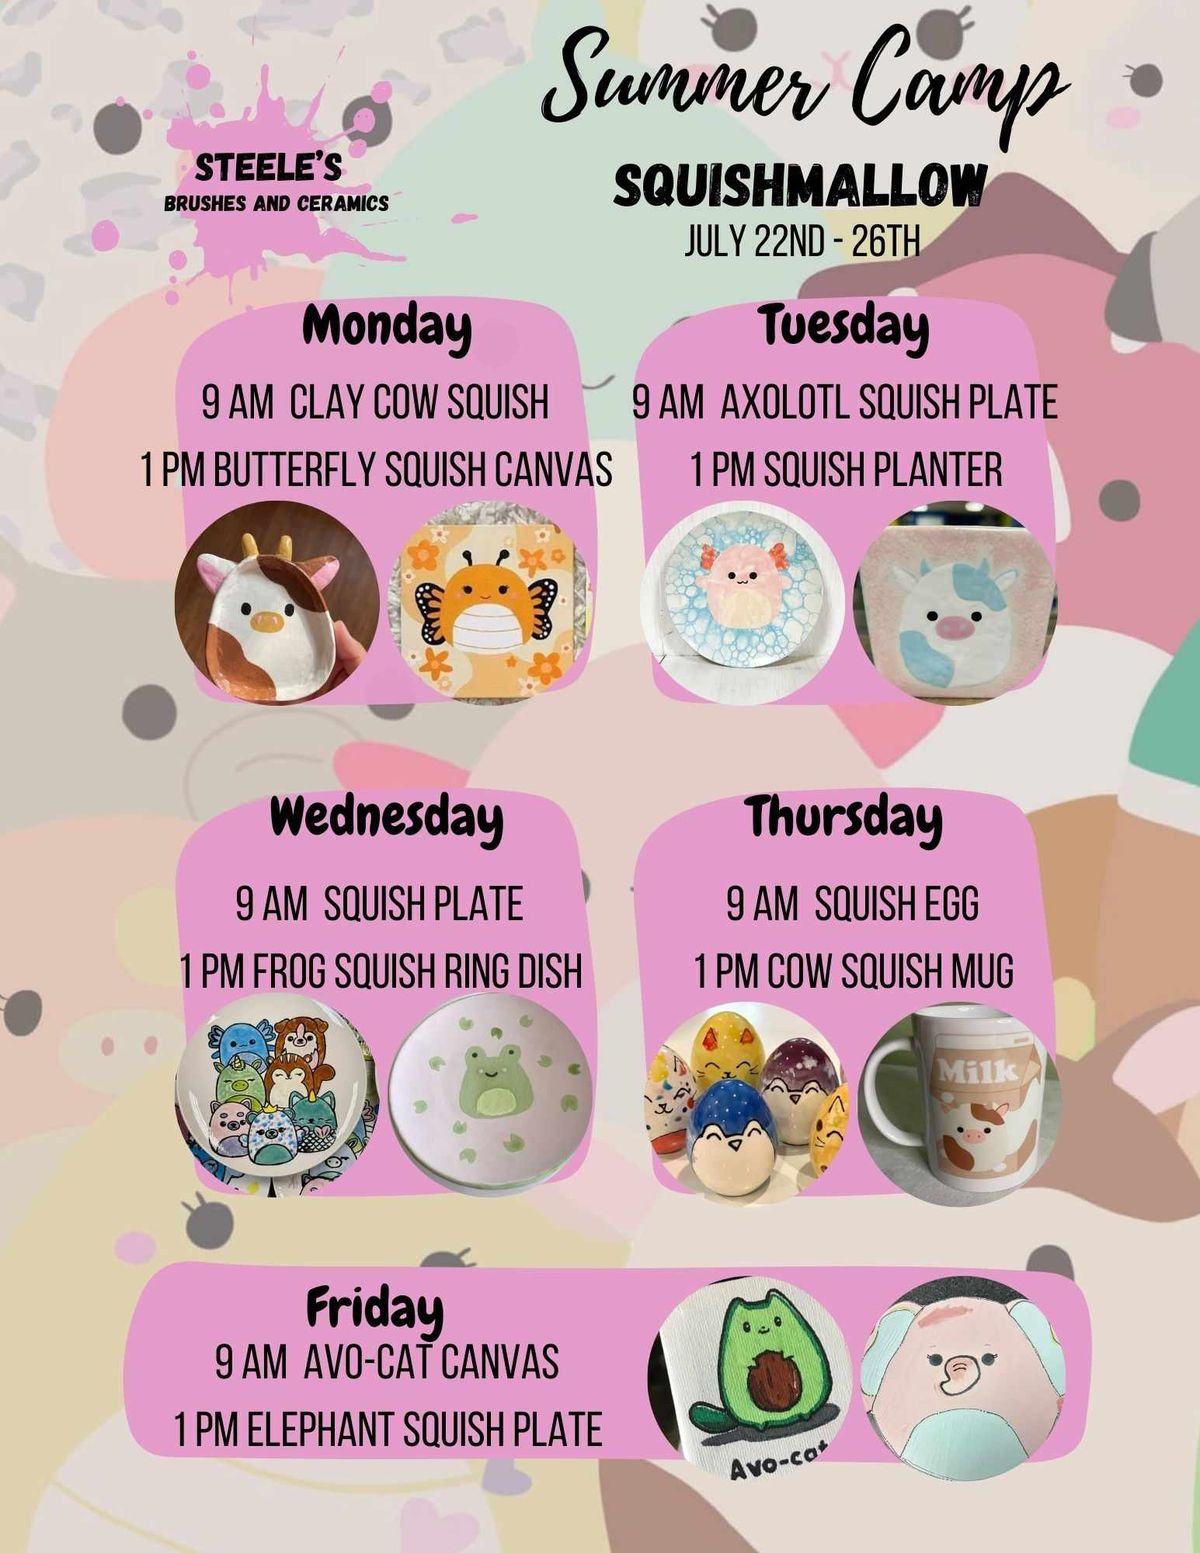 Summer Camp: Squishmallow July 22nd-26th